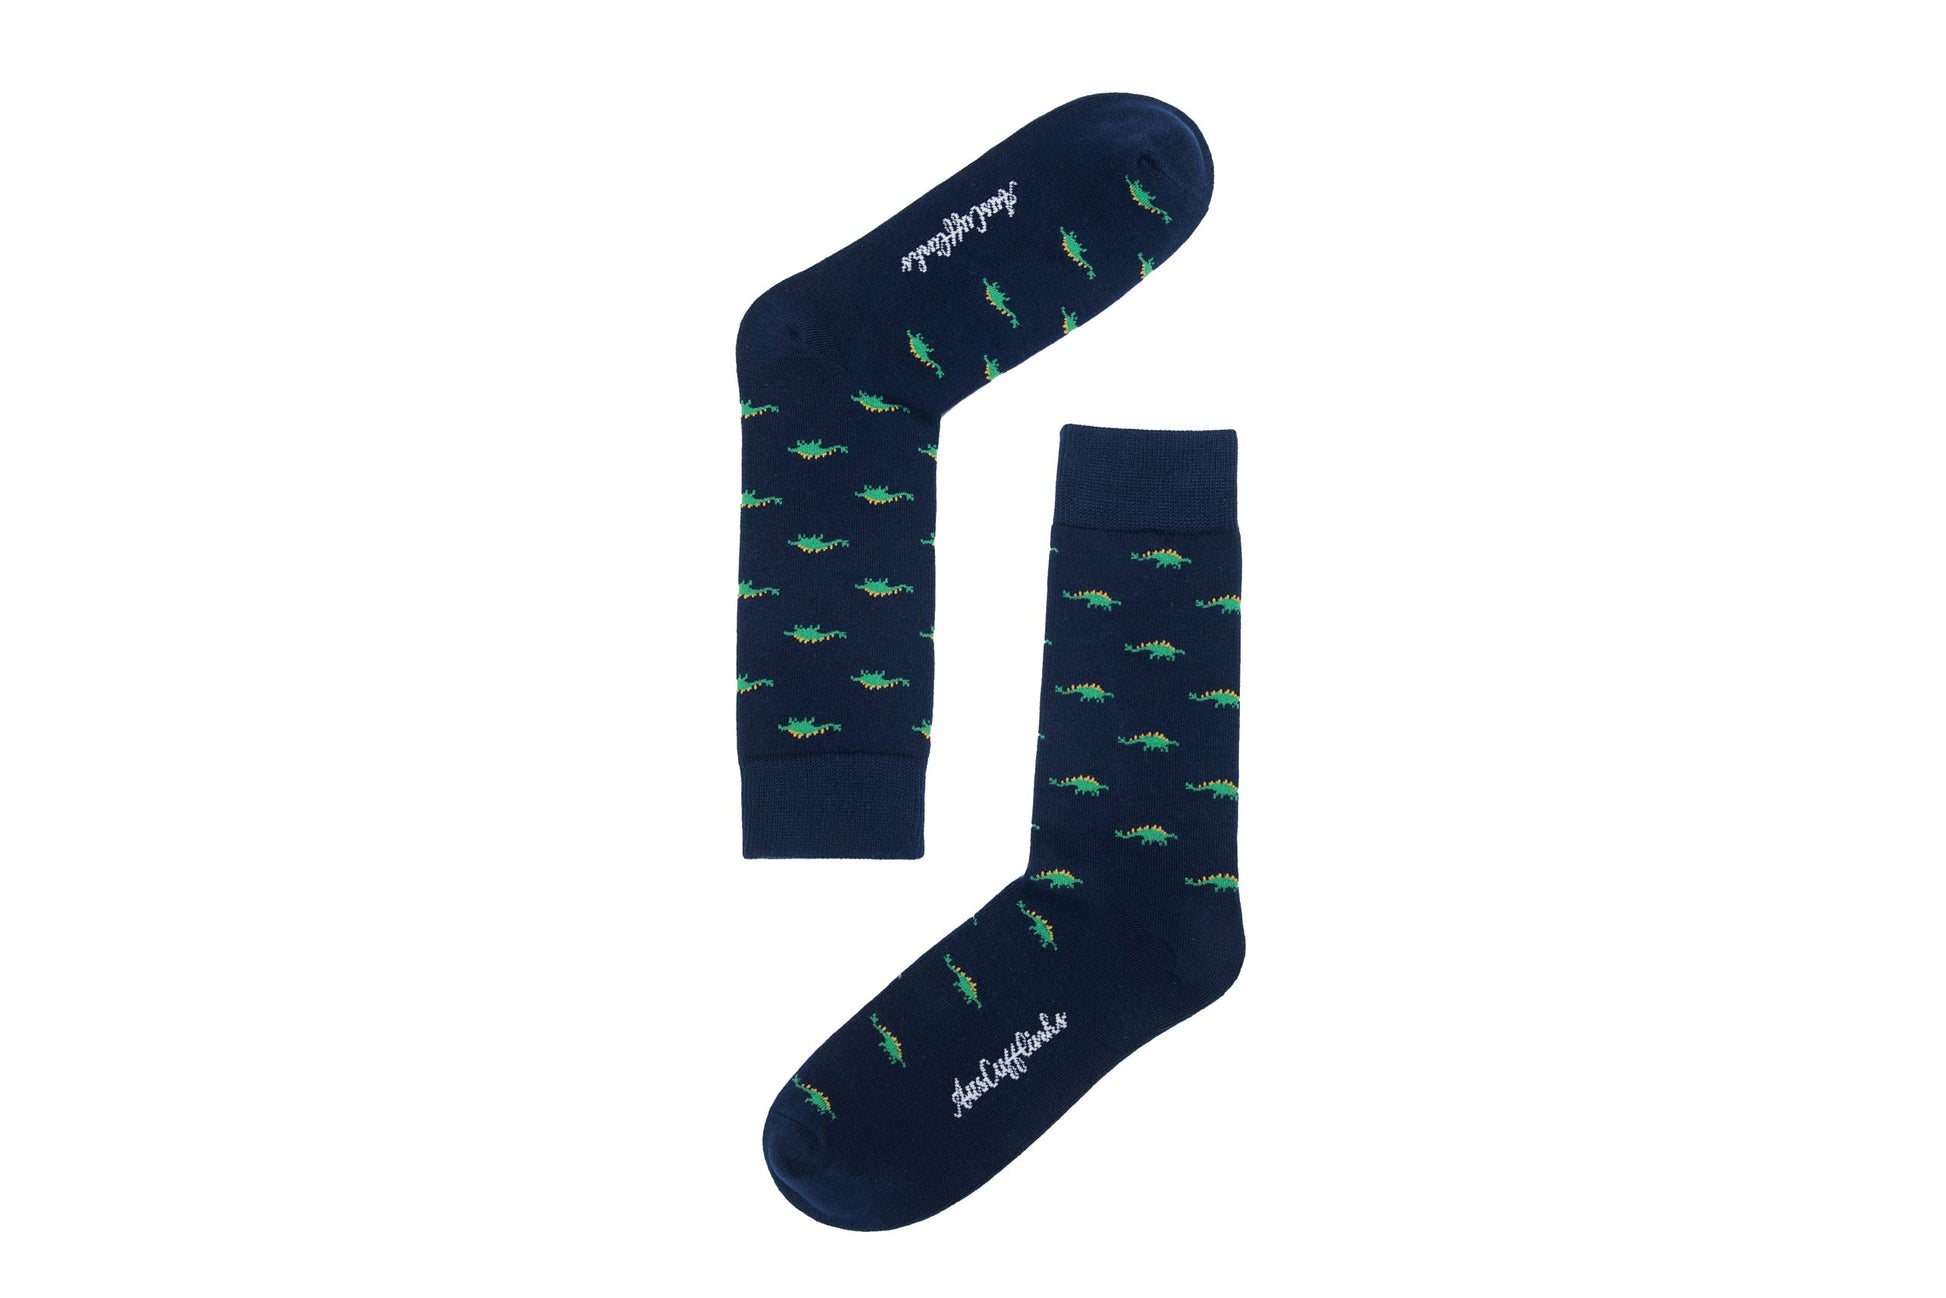 A pair of Stegosaurus Socks adorned with whimsical green dinosaur patterns displayed on a white background.